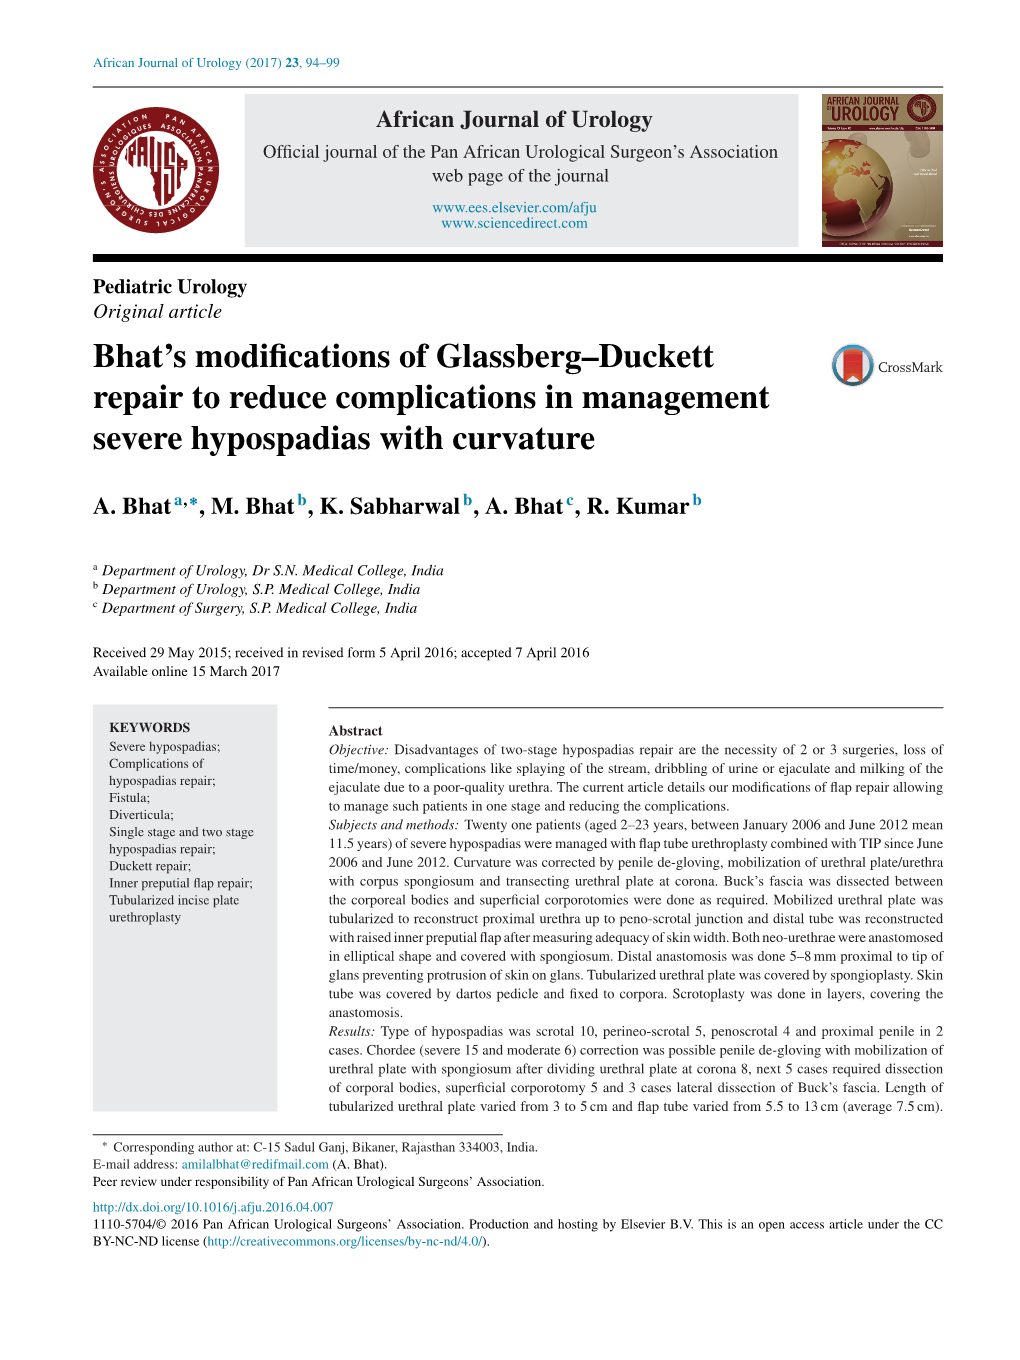 Bhat's Modifications of Glassberg–Duckett Repair to Reduce Complications in Management Severe Hypospadias with Curvature